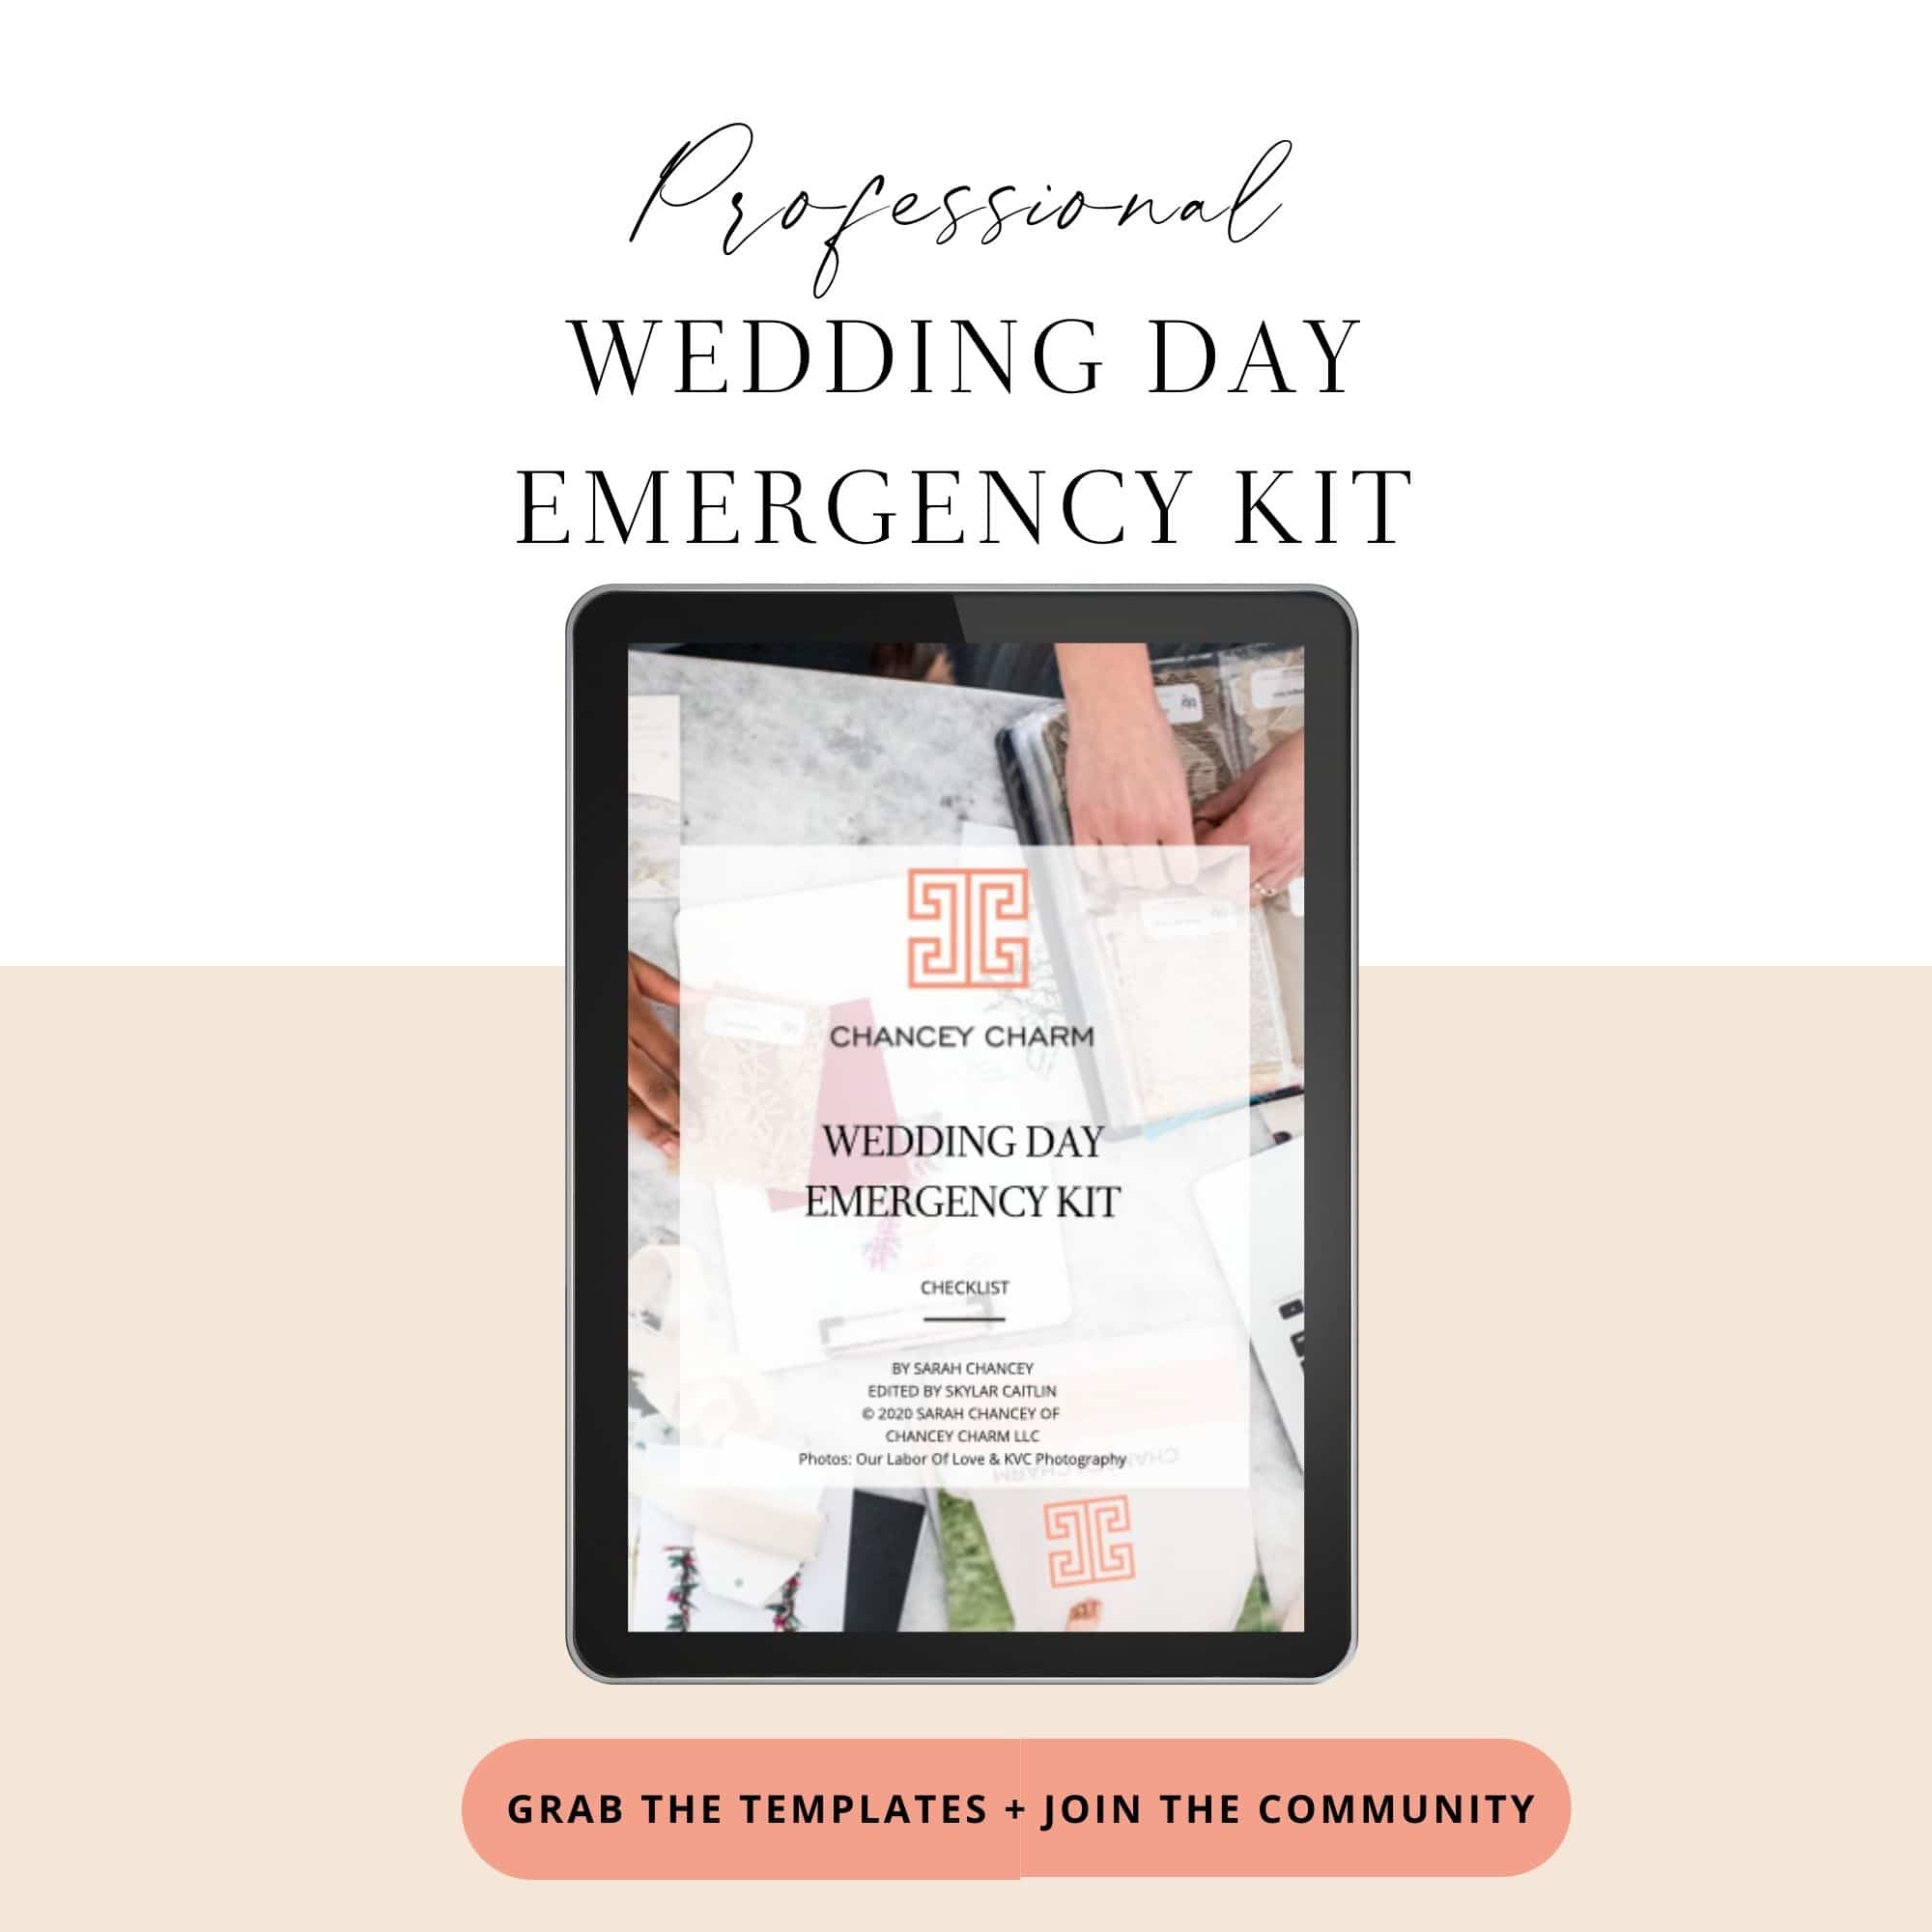 Better Prepared Means Less Stressed: THE Best Wedding Emergency Checklist